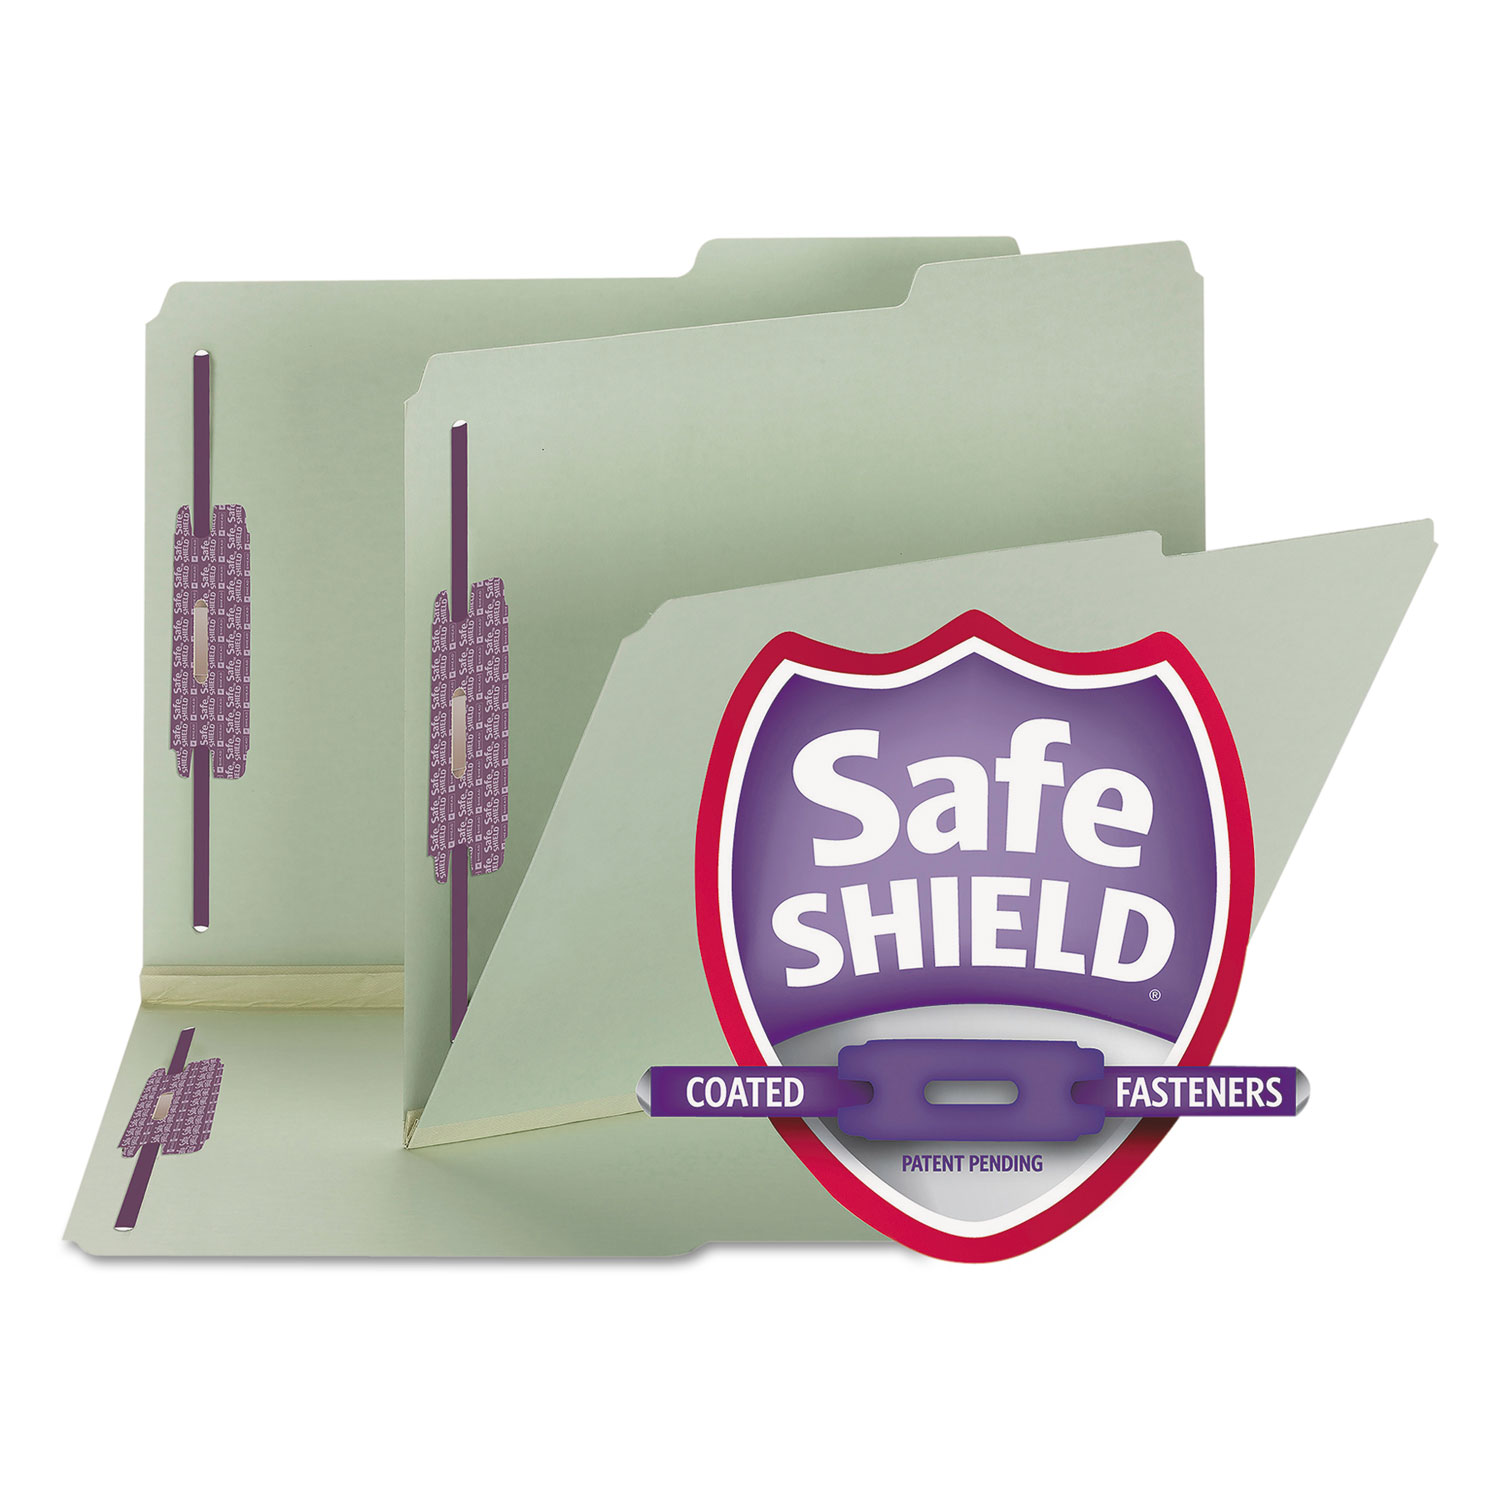  Smead 14920 Recycled Pressboard Folders w/Two SafeSHIELD Fasteners, 2/5-Cut Tab, Right of Center, 2 Exp, Letter Size, Gray-Green, 25/Box (SMD14920) 